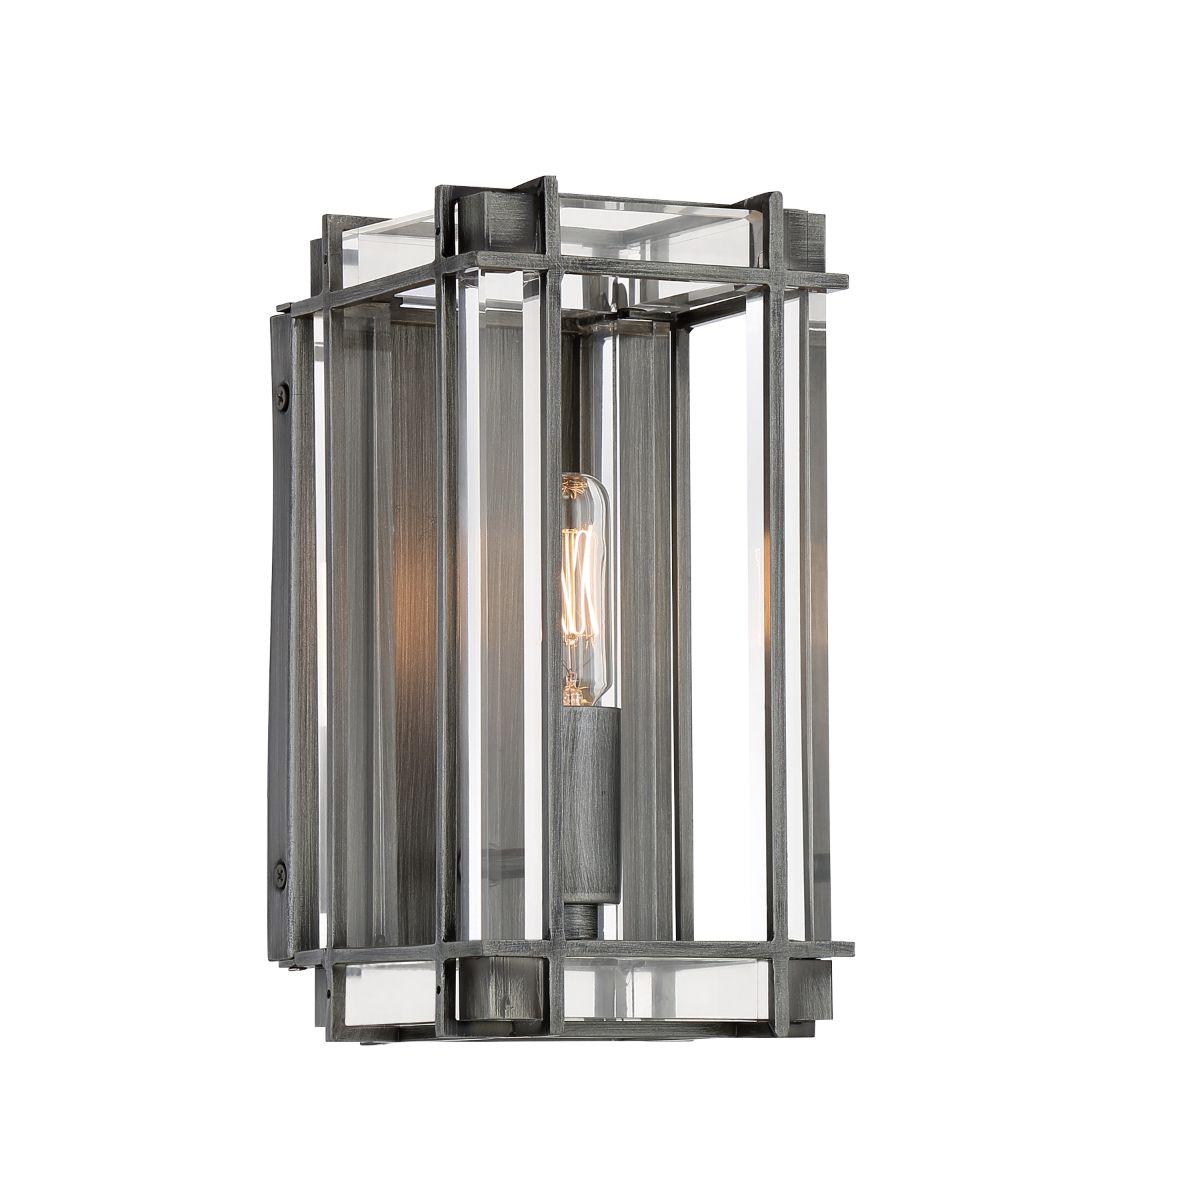 Langen Square 10 in. Wall Sconce Antique Nickel finish